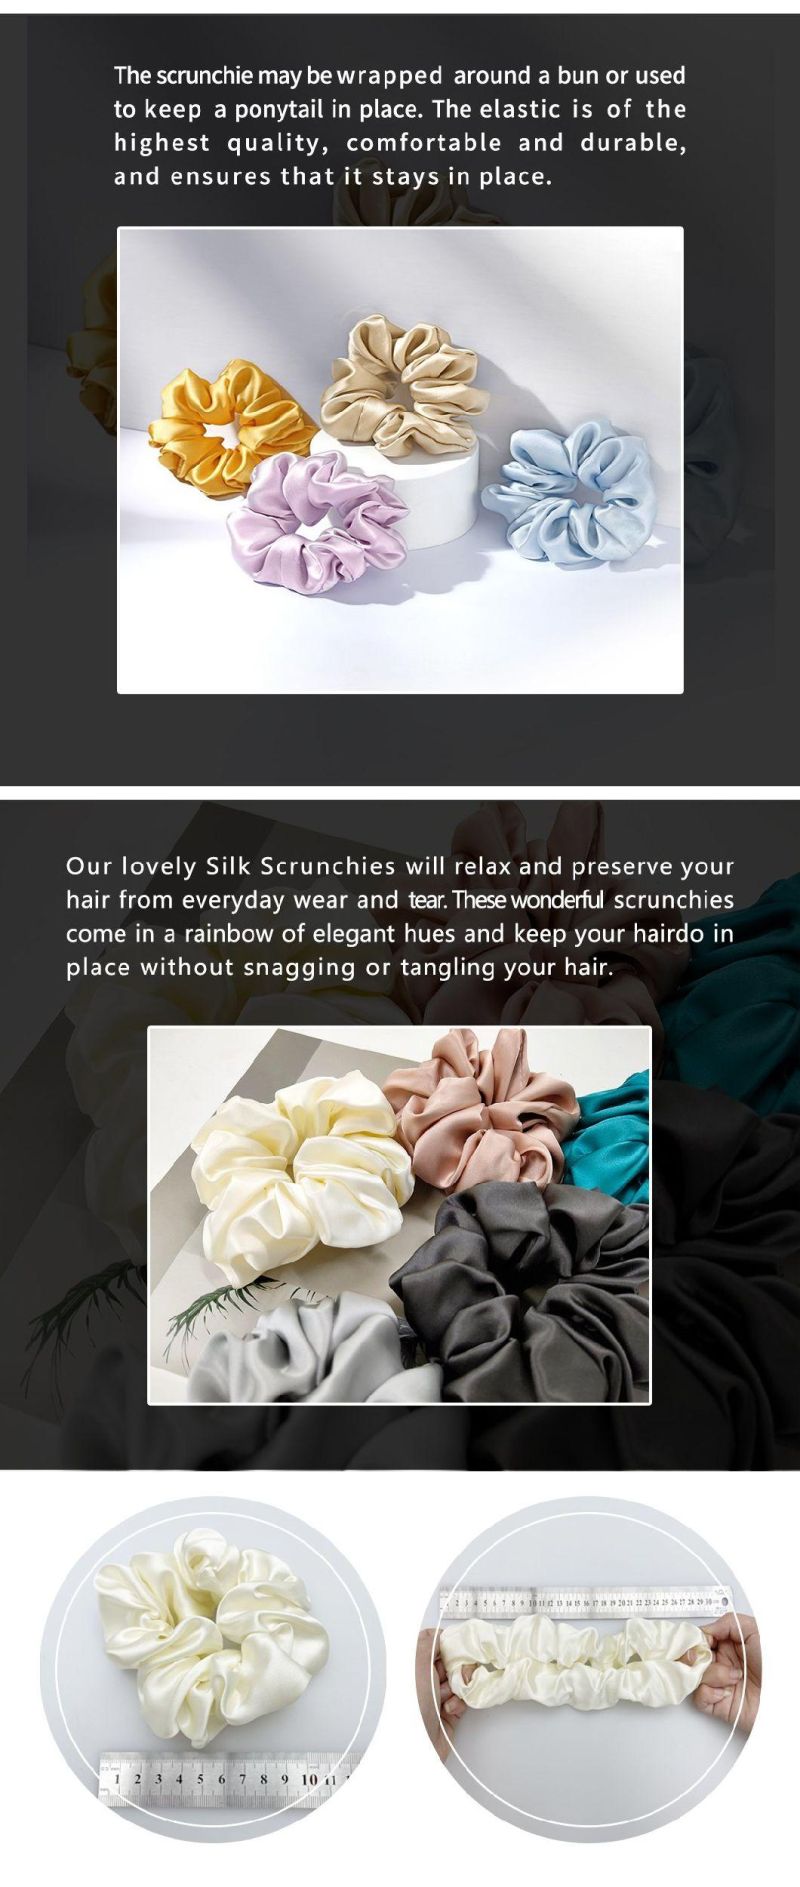 Mulberry Silk Scrunchies in High Quality